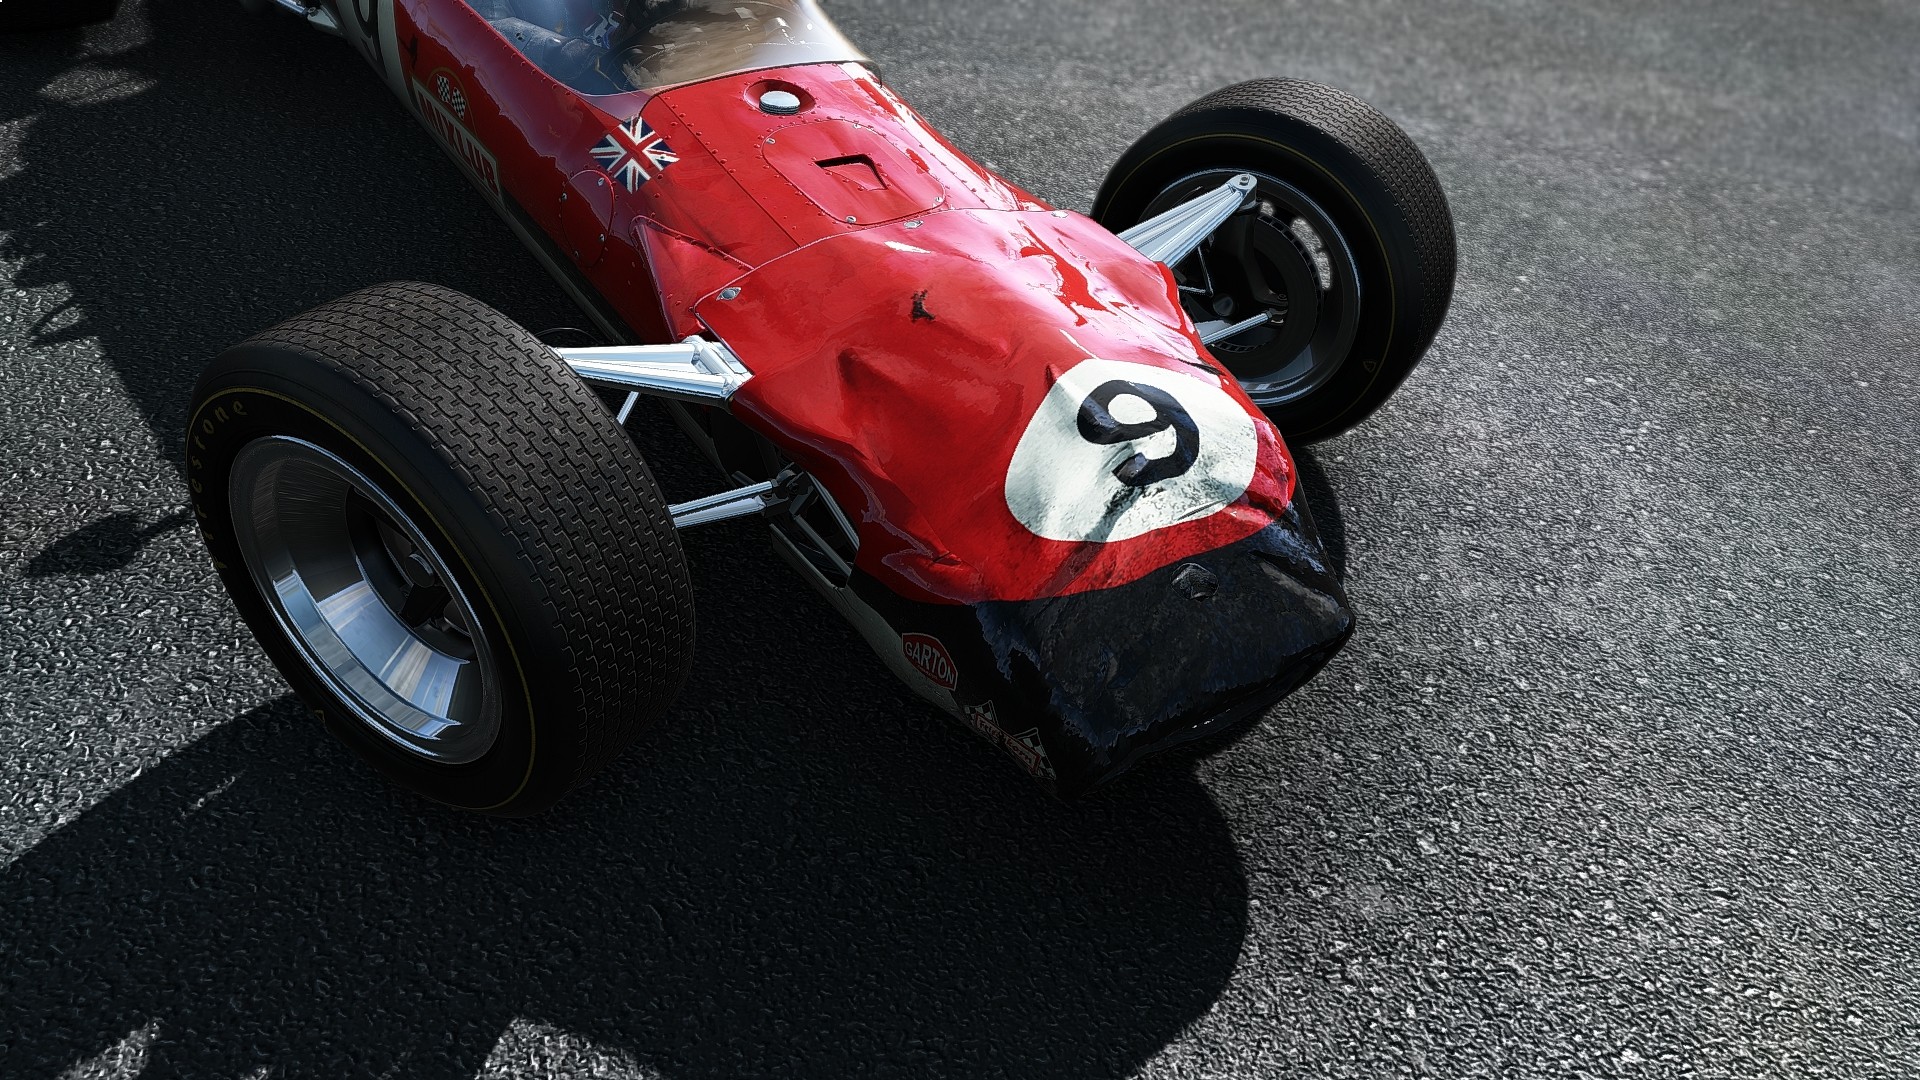 Project CARS Is The Best Looking Racing Game - New Screenshots Put All